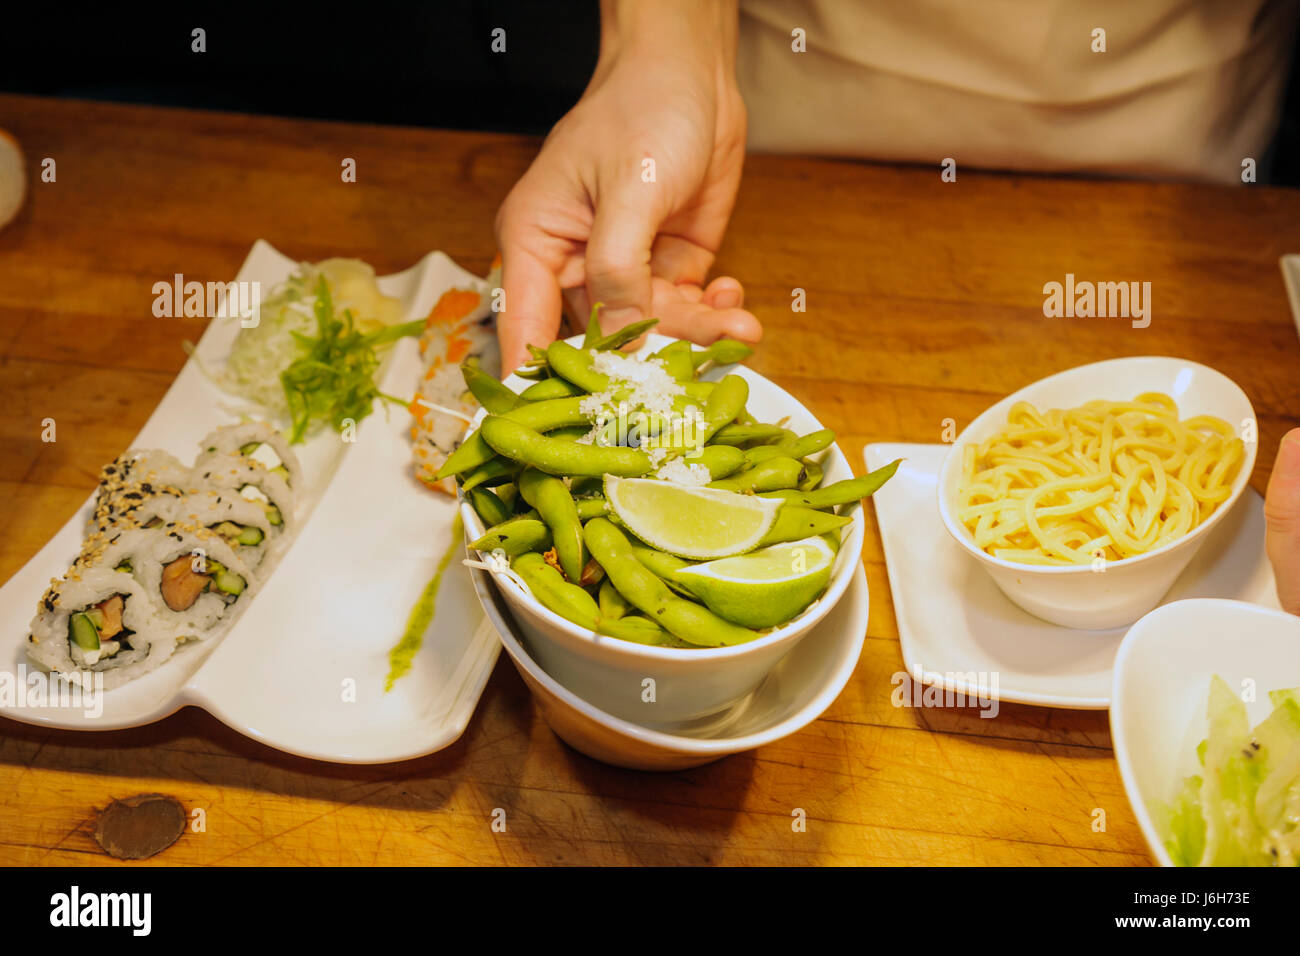 Roanoke Virginia,Campbell Street,Metro,restaurant restaurants food dining cafe cafes,American cuisine,Asian plate,edamame,sushi roll,noodles,dining,fo Stock Photo